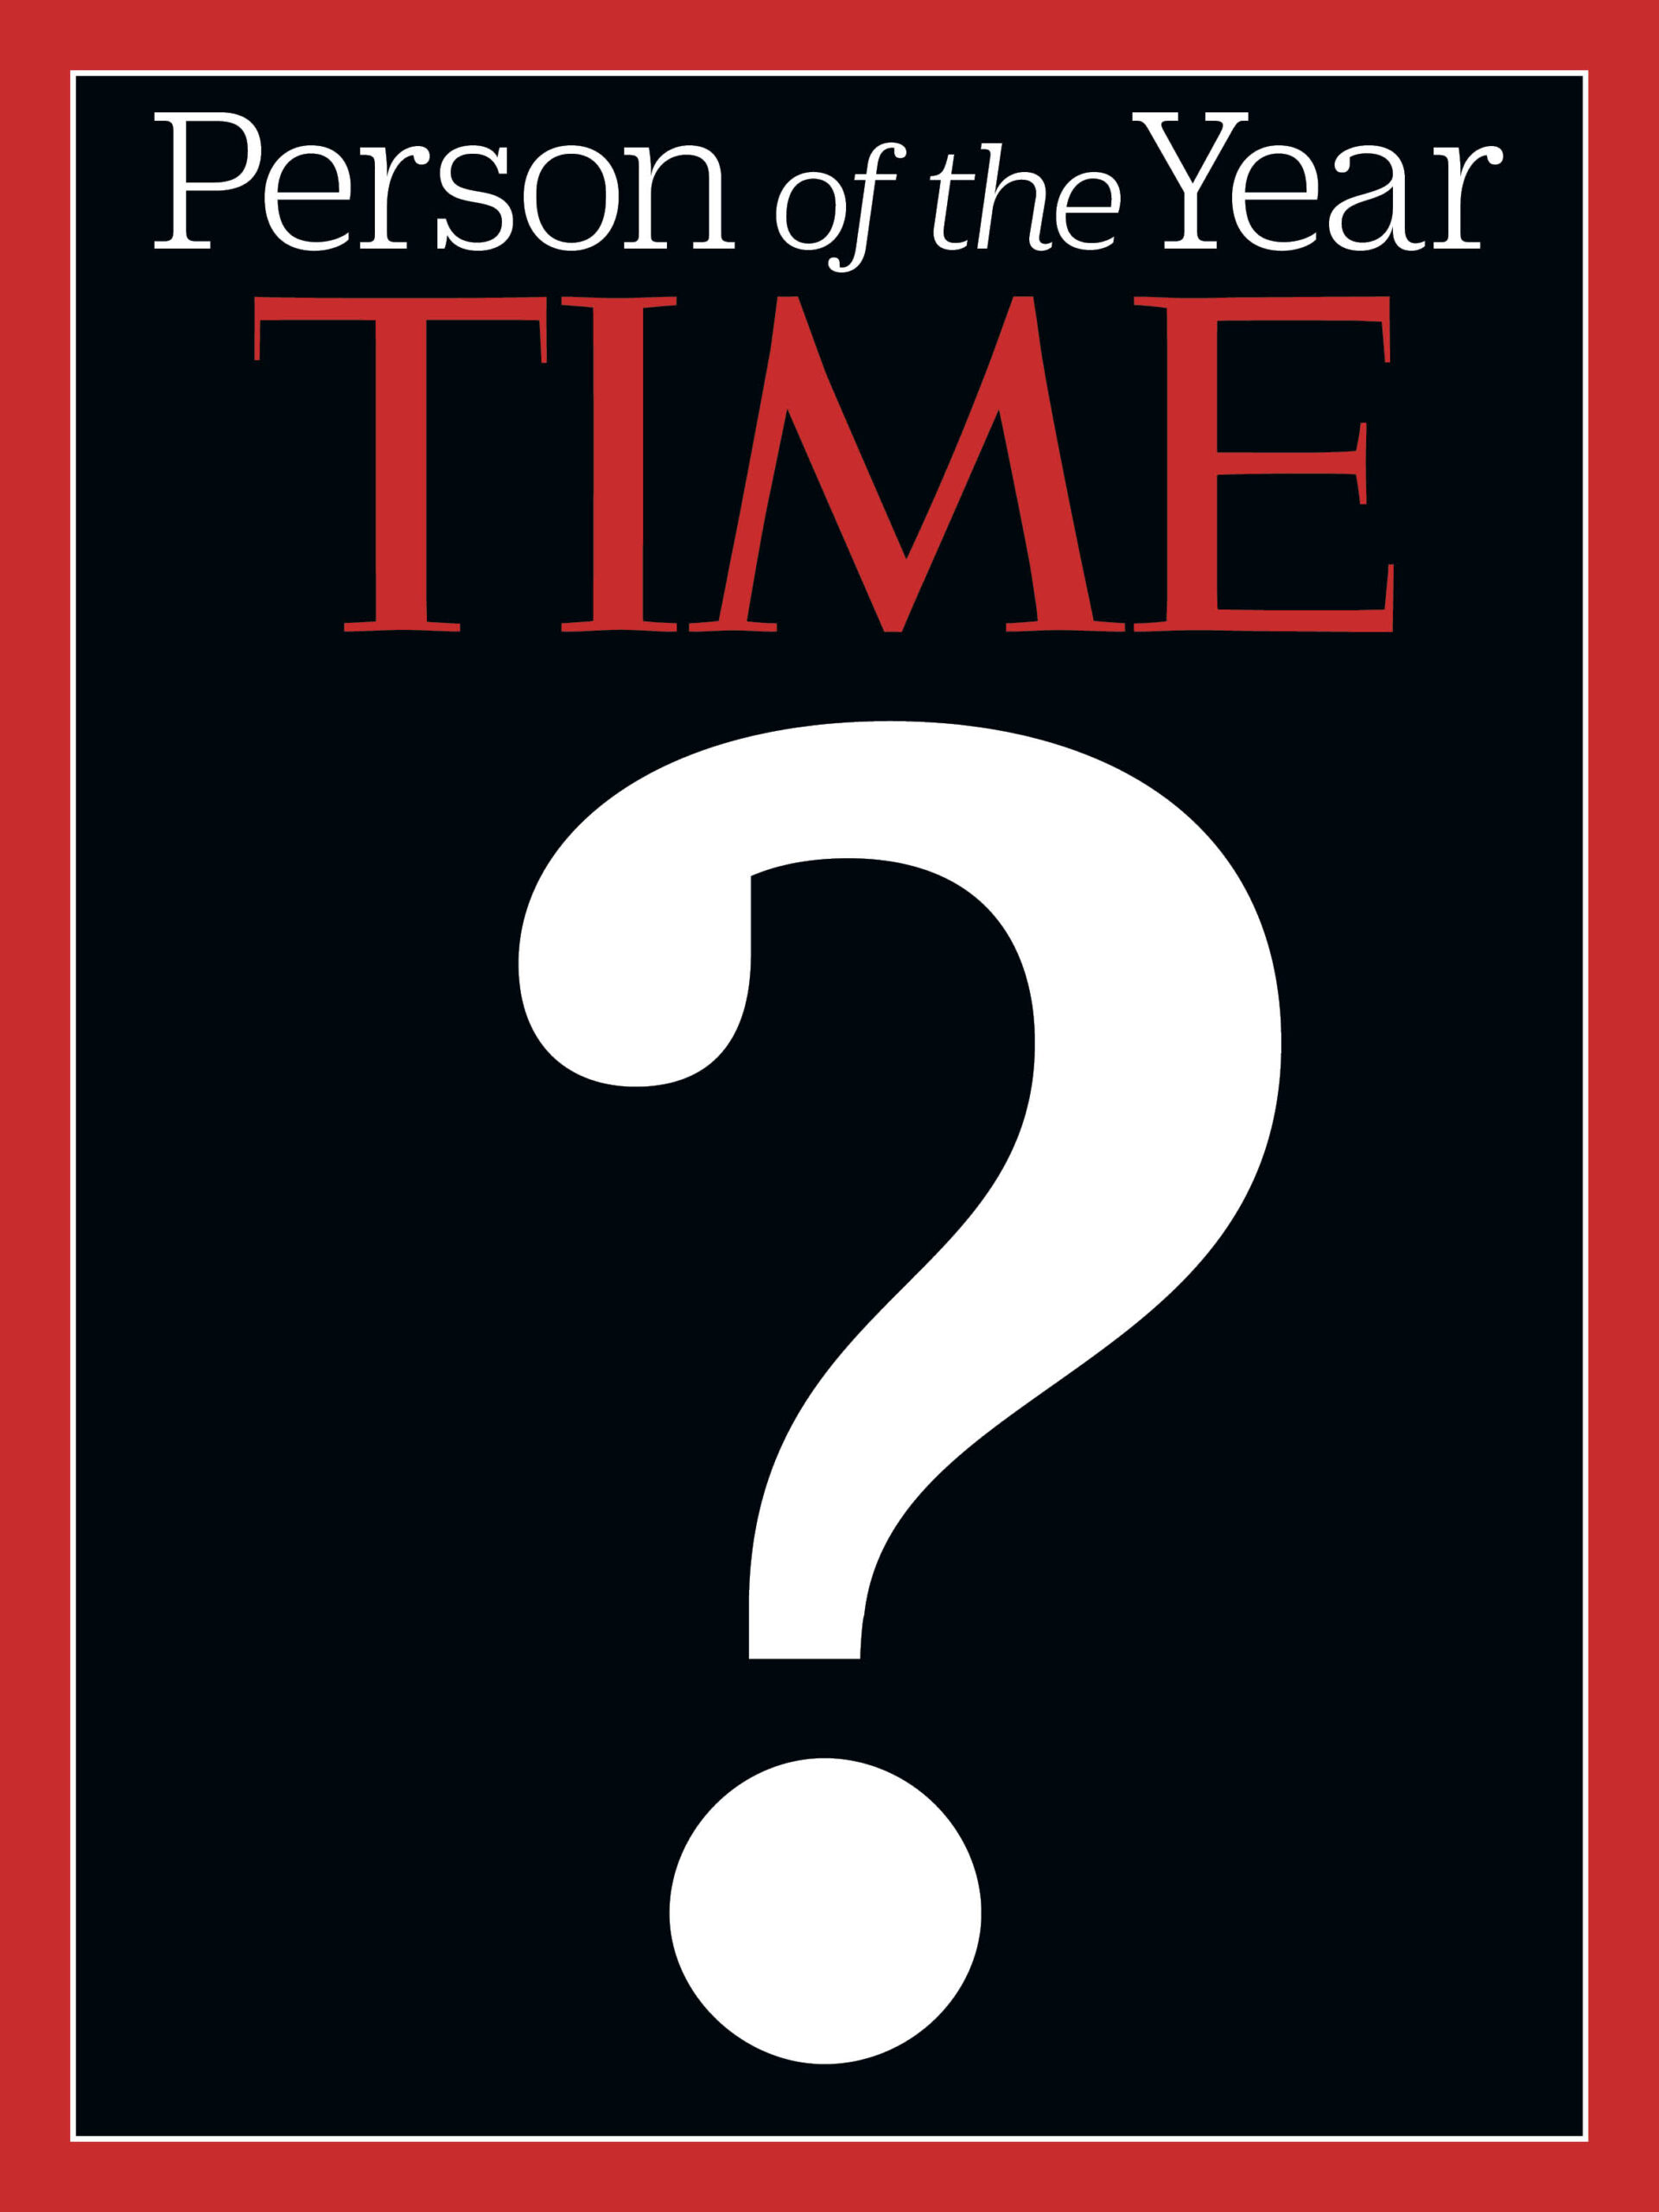 OMG, WATCH Time Magazine shares a cutup of every personoftheyear